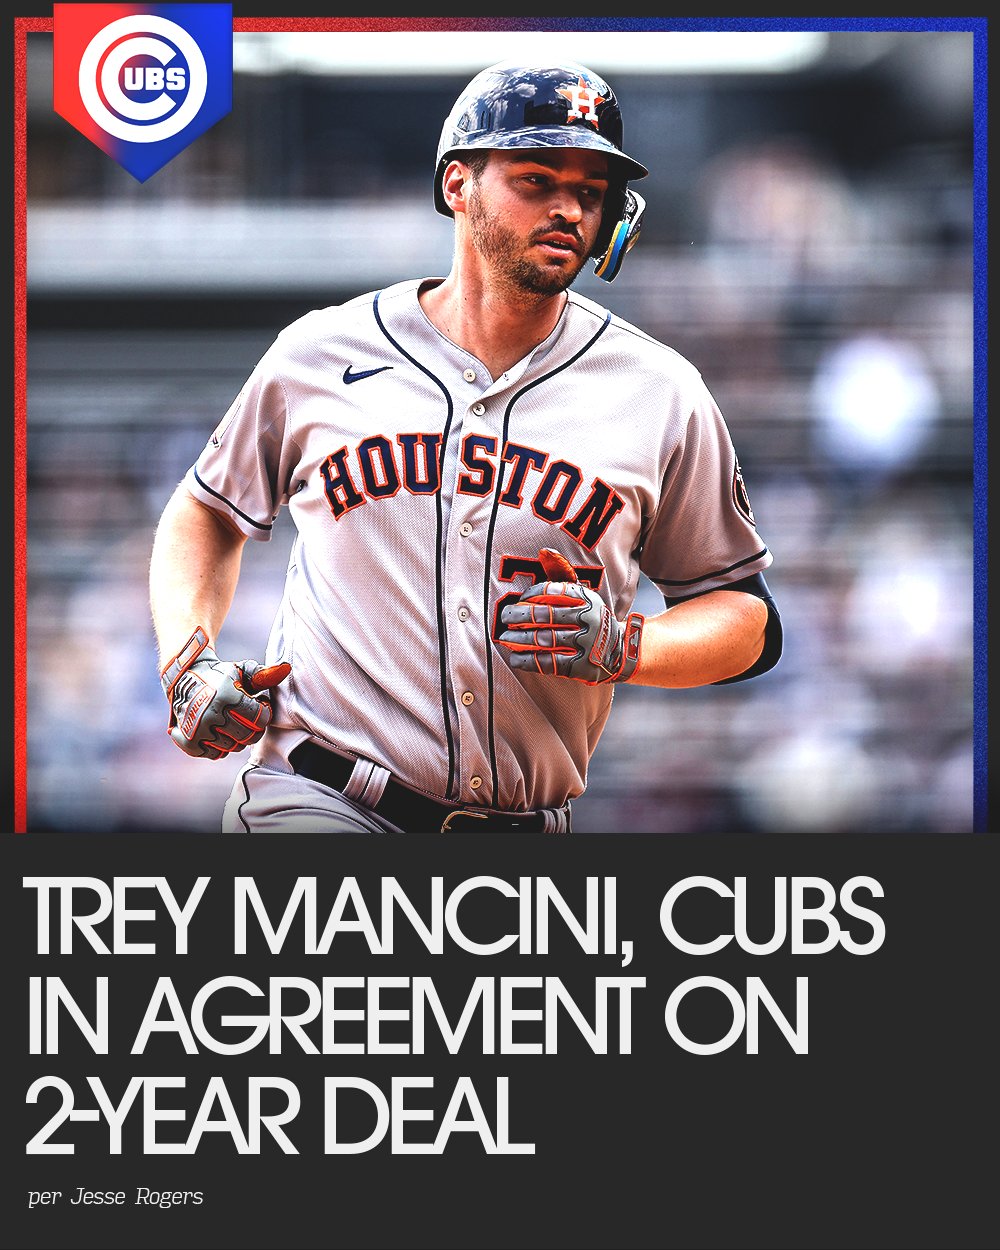 Chicago Cubs Add Another Power Threat By Signing Trey Mancini